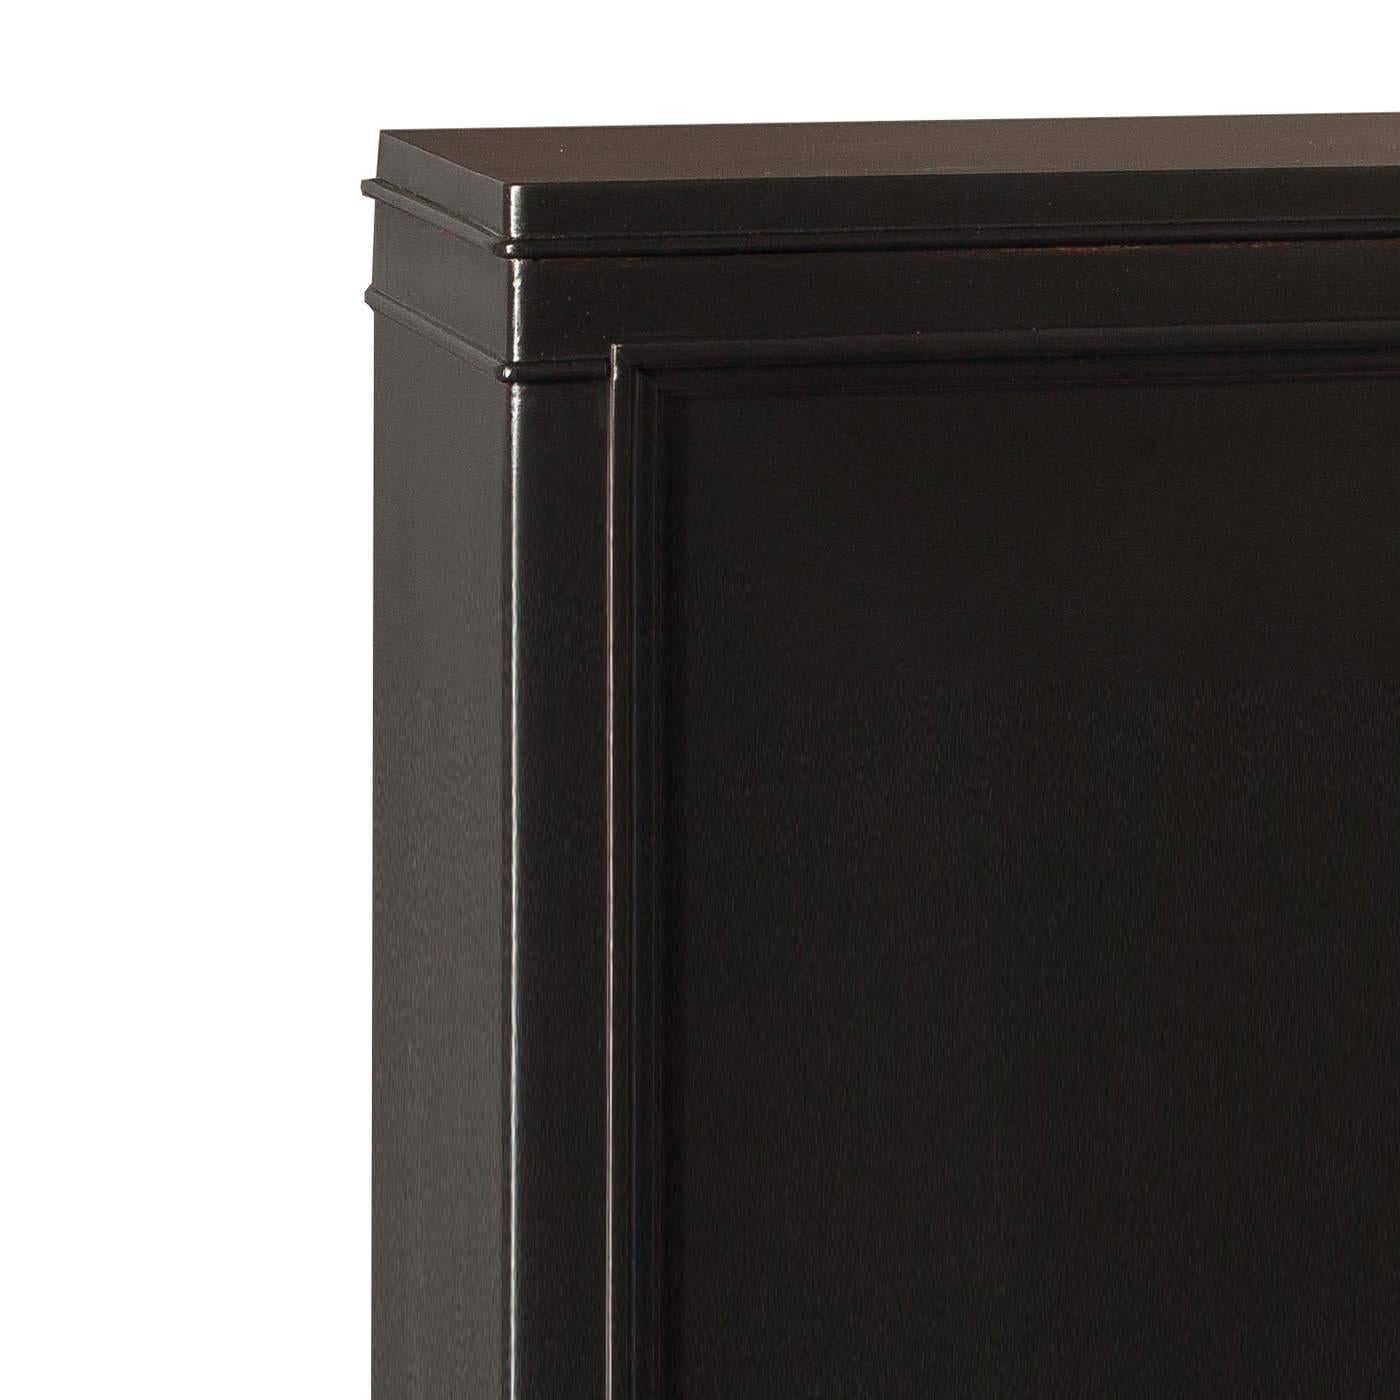 This two-door cabinet is the result of the finest Italian craftsmanship. With four internal shelves, is perfect for storing everything from books to dinnerware. Two elegant metal handles with the bright and intense effect of the hand-applied